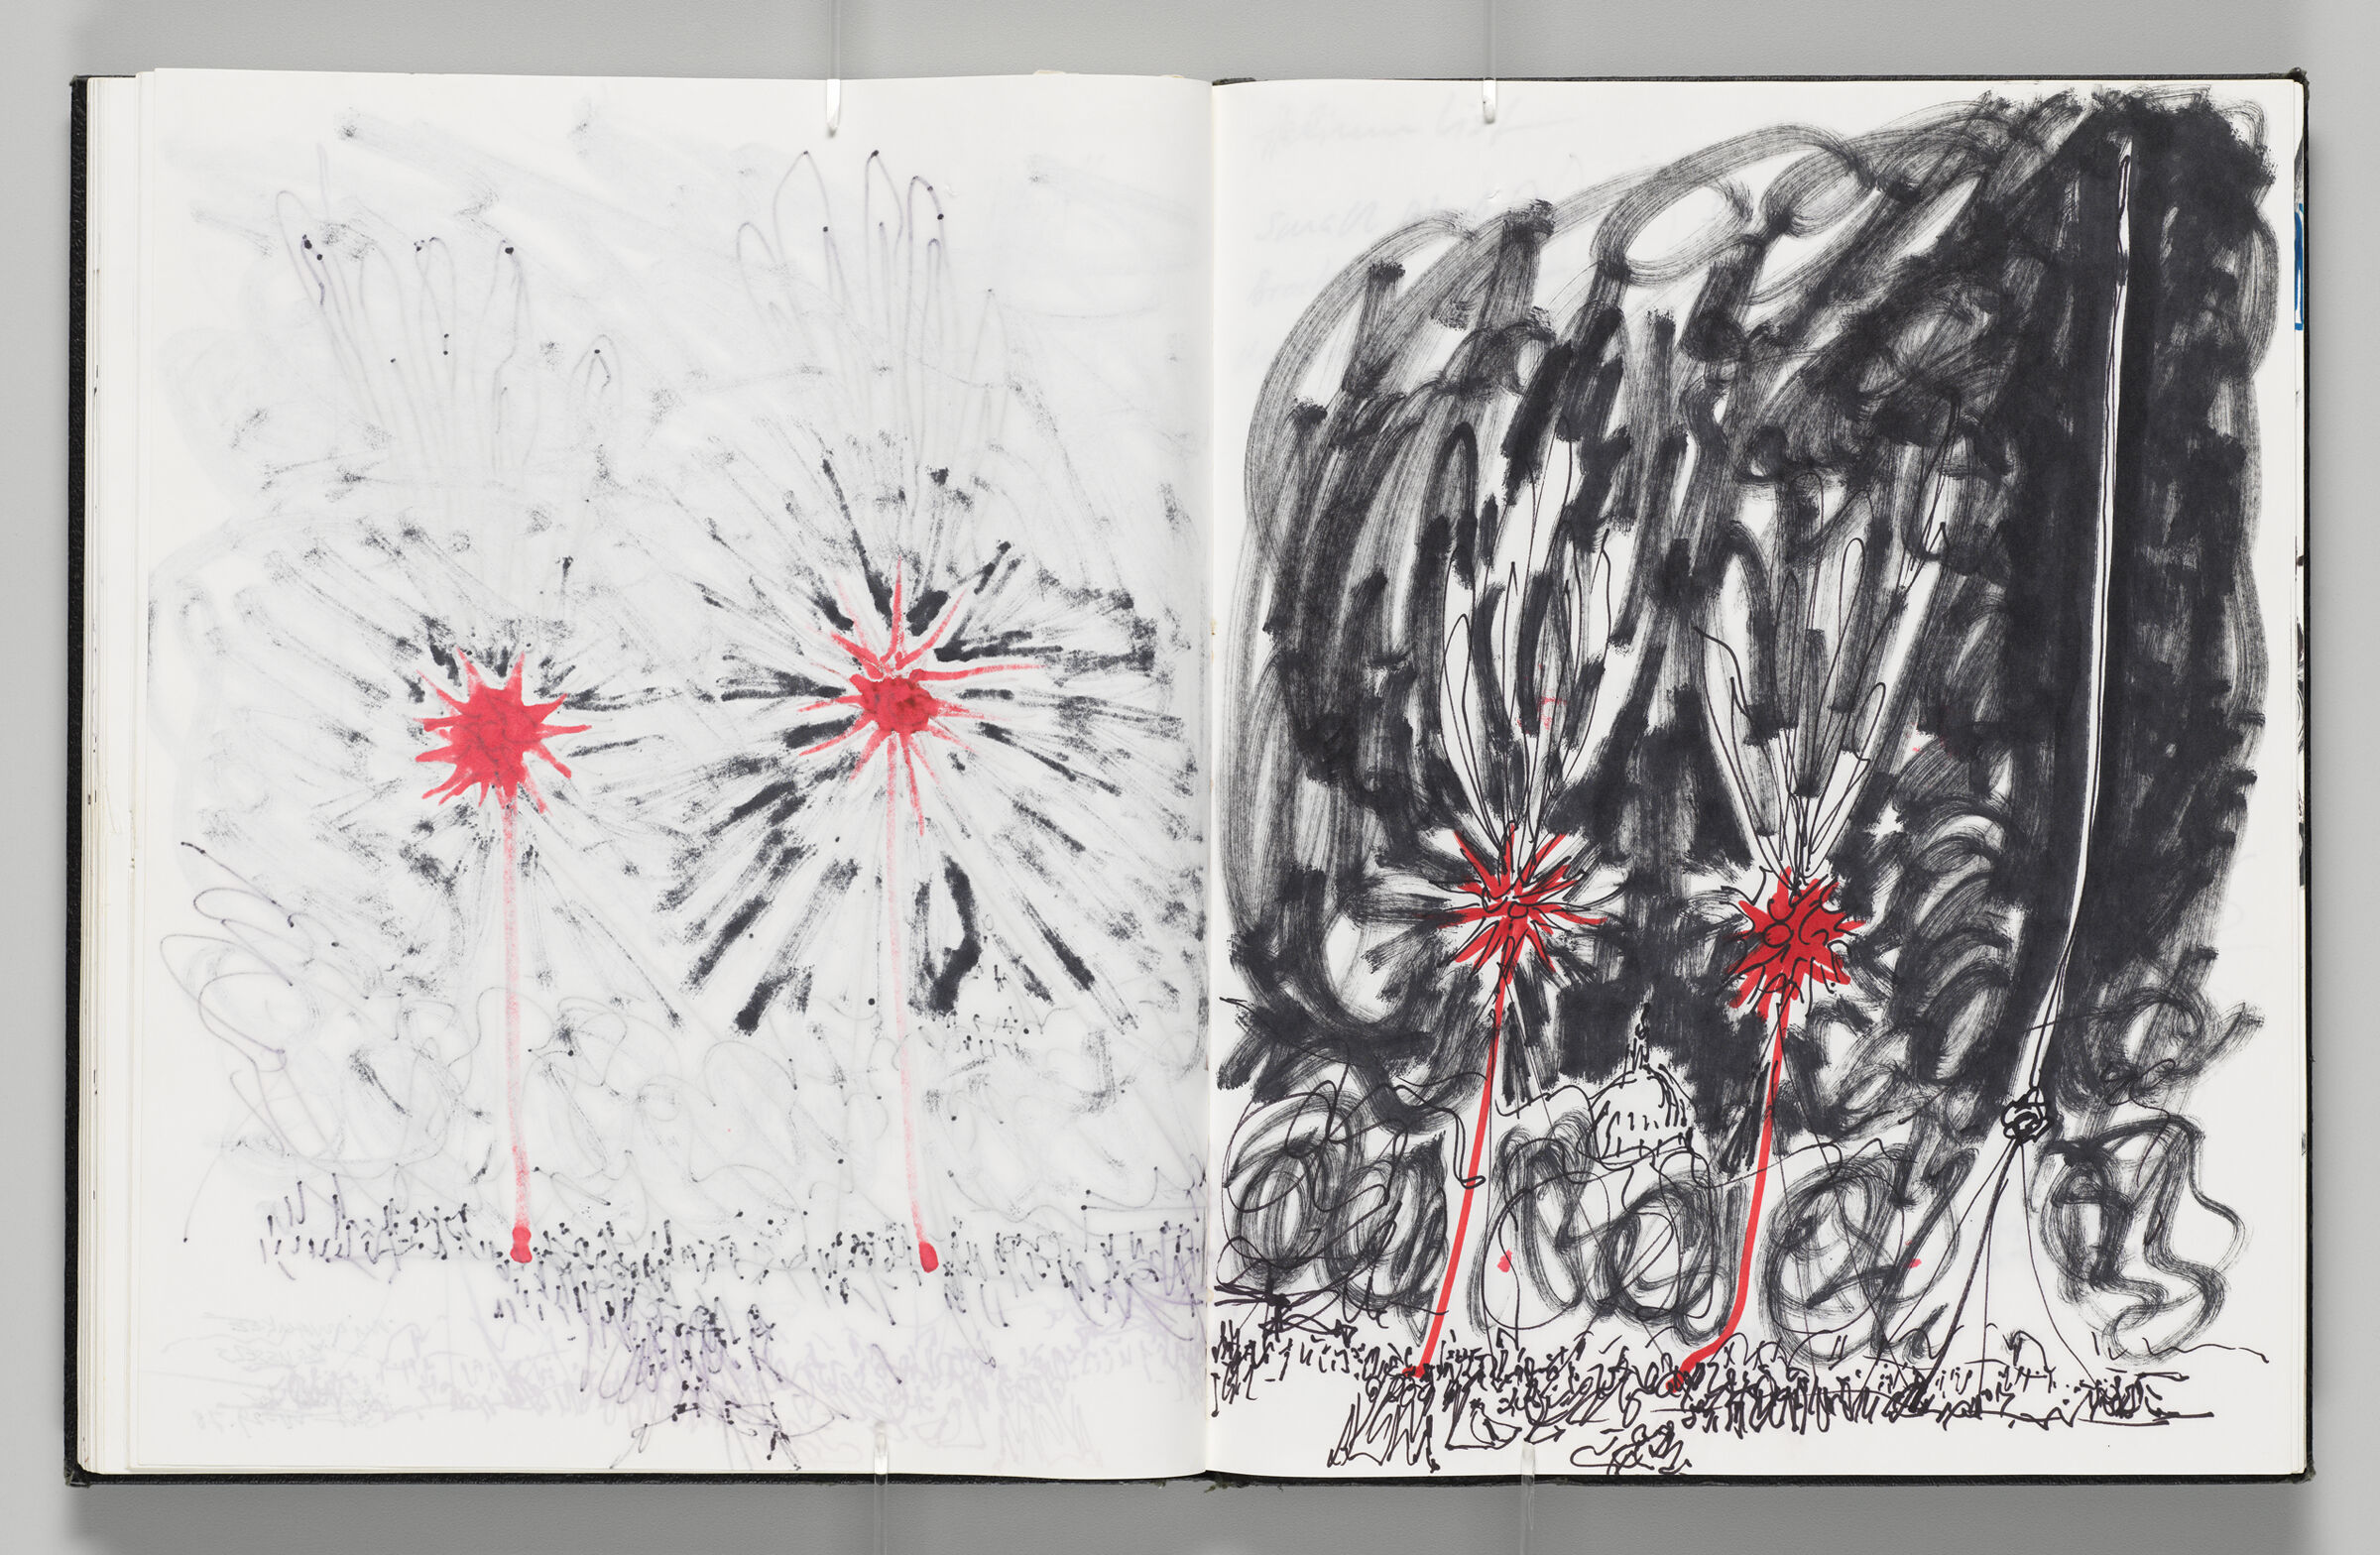 Untitled (Bleed-Through Of Previous Page, Left Page); Untitled (Inflatables Among Crowd, Right Page)